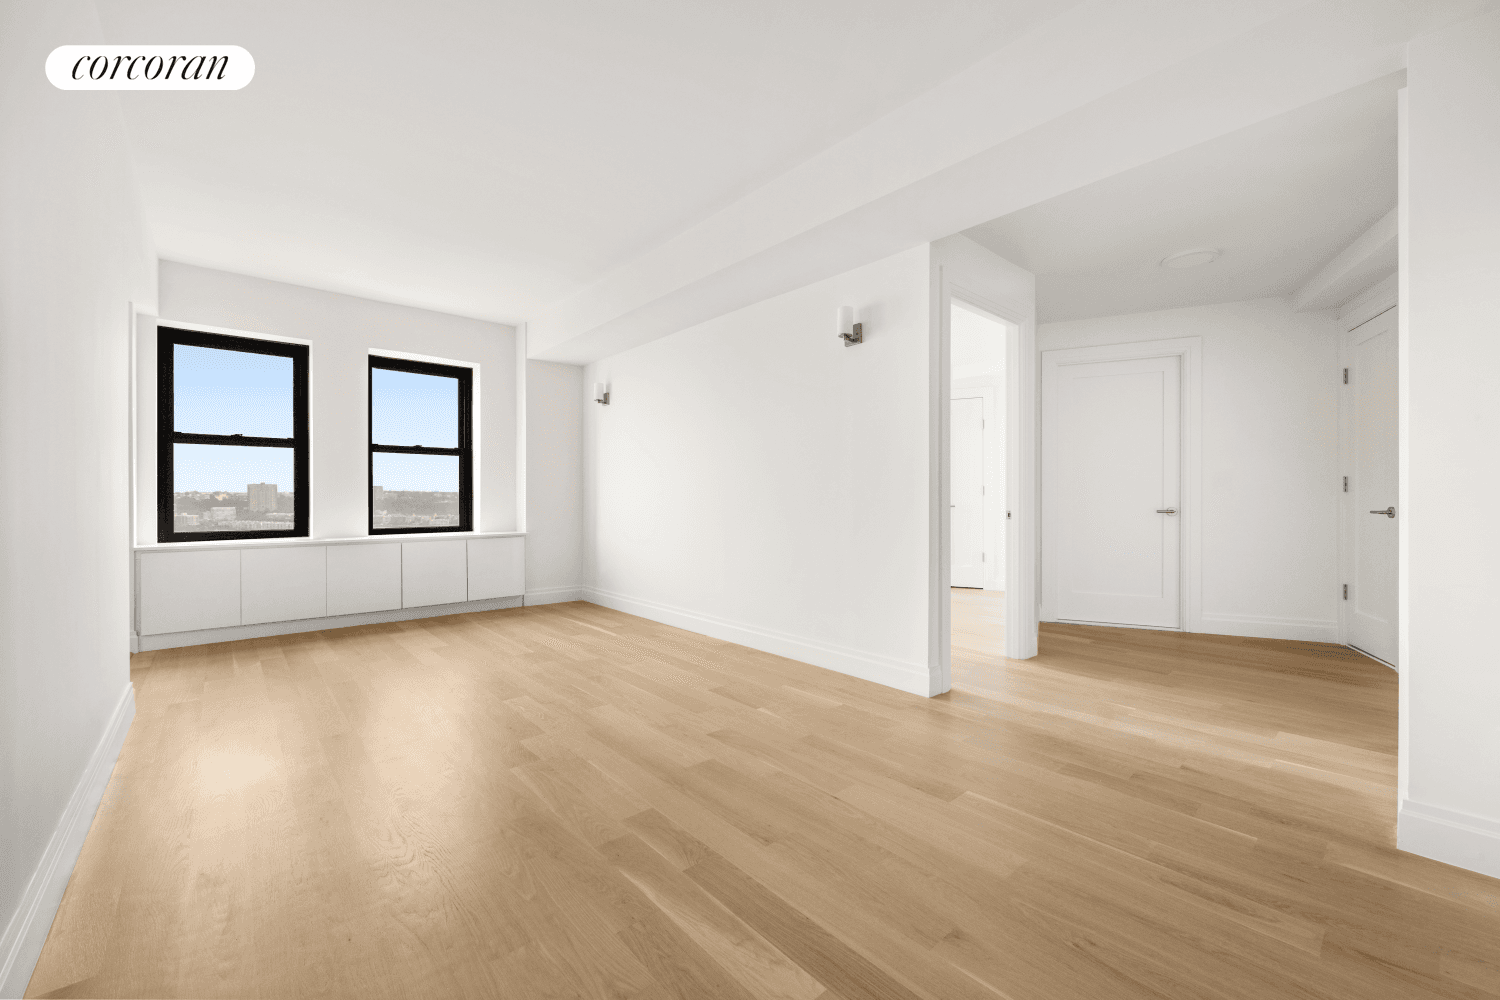 With sweeping views of the Hudson river and lush park, this is a truly unique opportunity to own a piece of Manhattan's real estate.